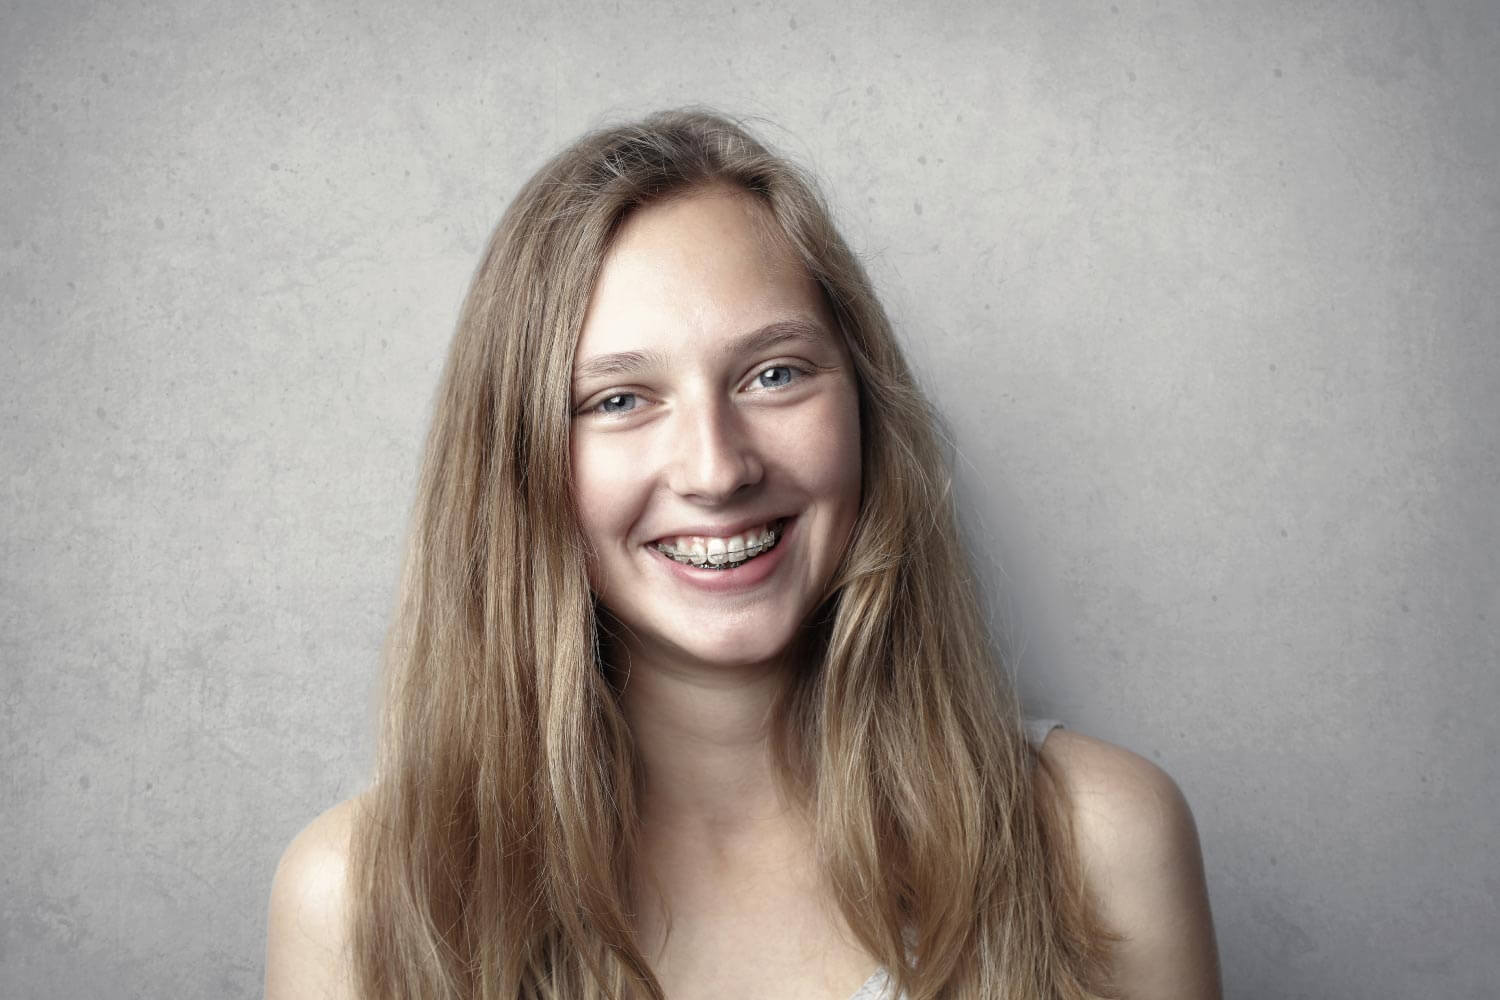 Brunette girl smiles with ceramic braces against a gray wall in Weatherford, TX